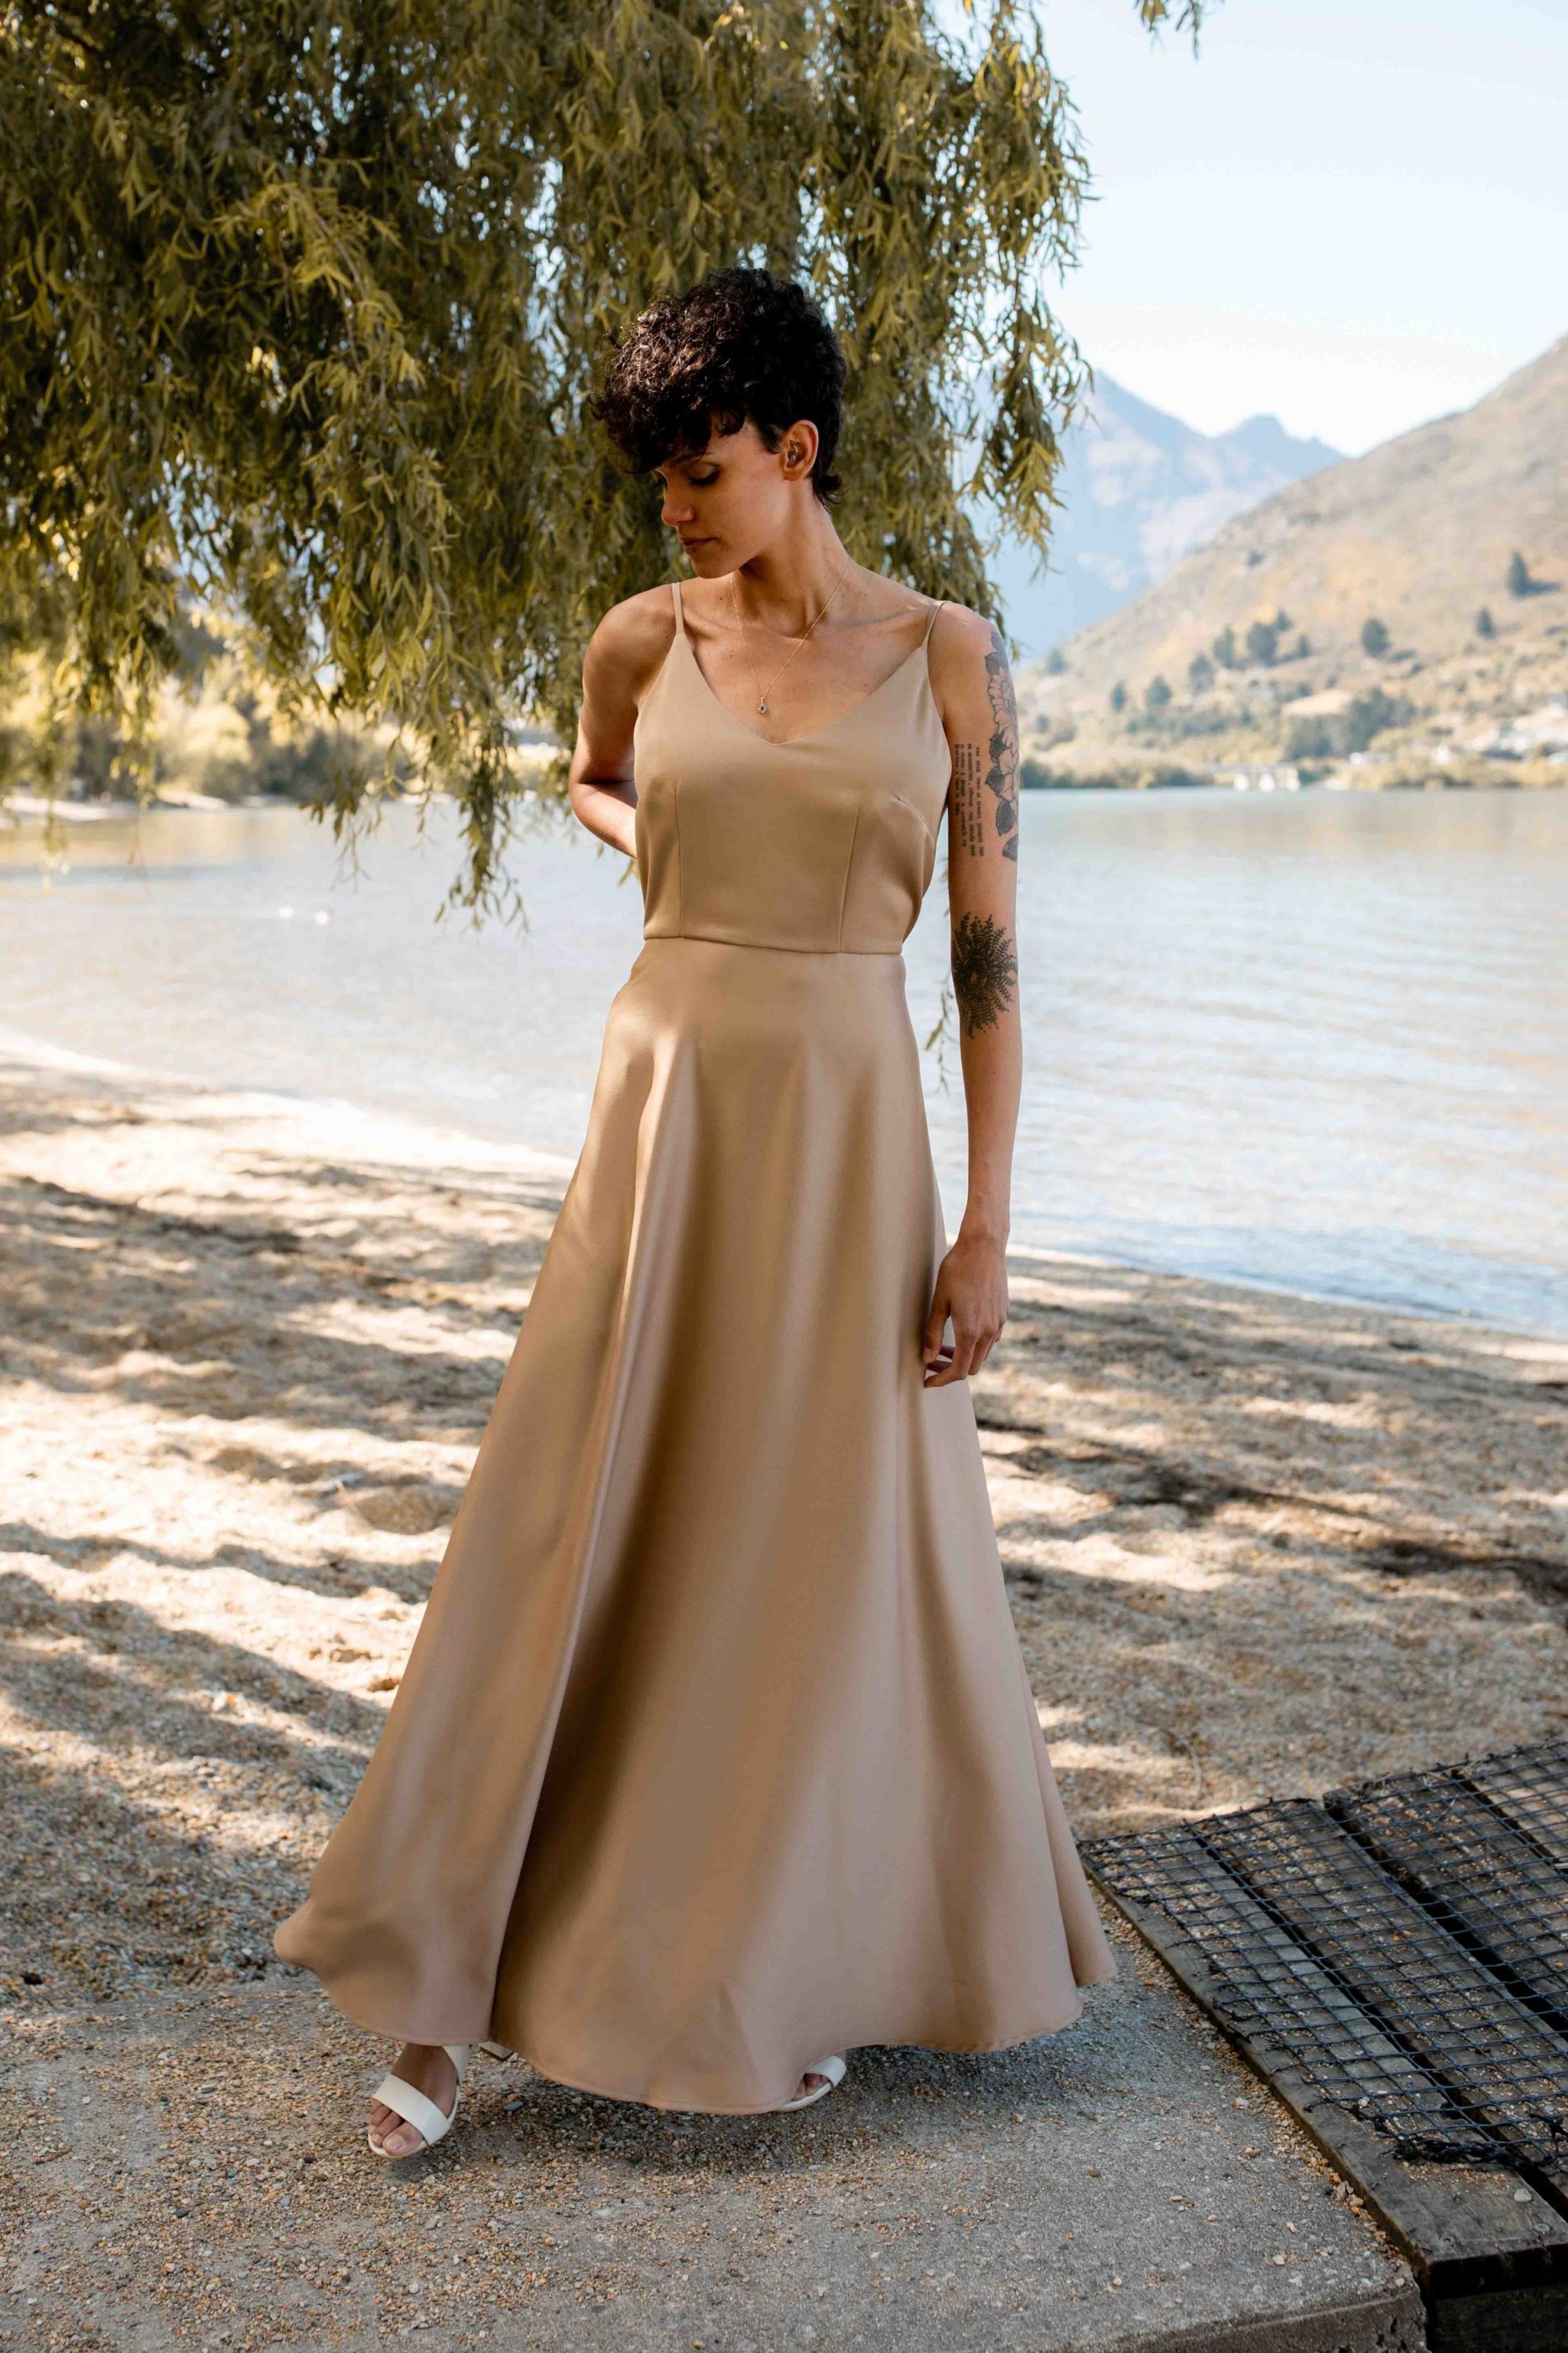 Xena+Dress+in+Armani+Nude+-+Nemo+Bridal+Couture+Queenstown+New+Zealand+0V9A2566.jpg